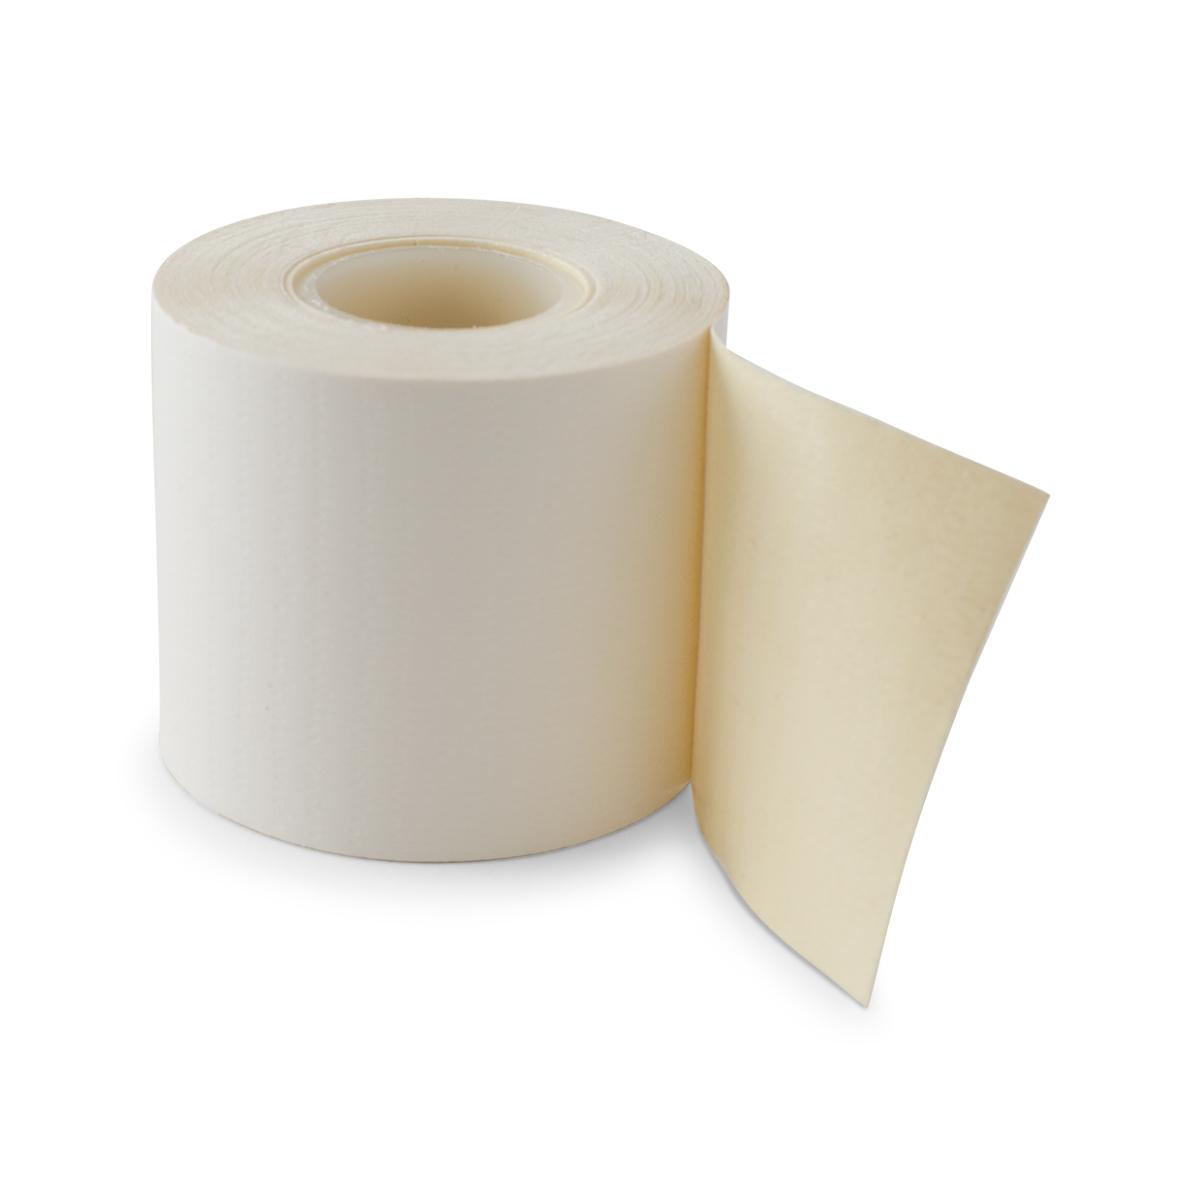 Product Cleaner's Supply Box Sealing Tape - 30' x 2" - Cleaner's Supply image